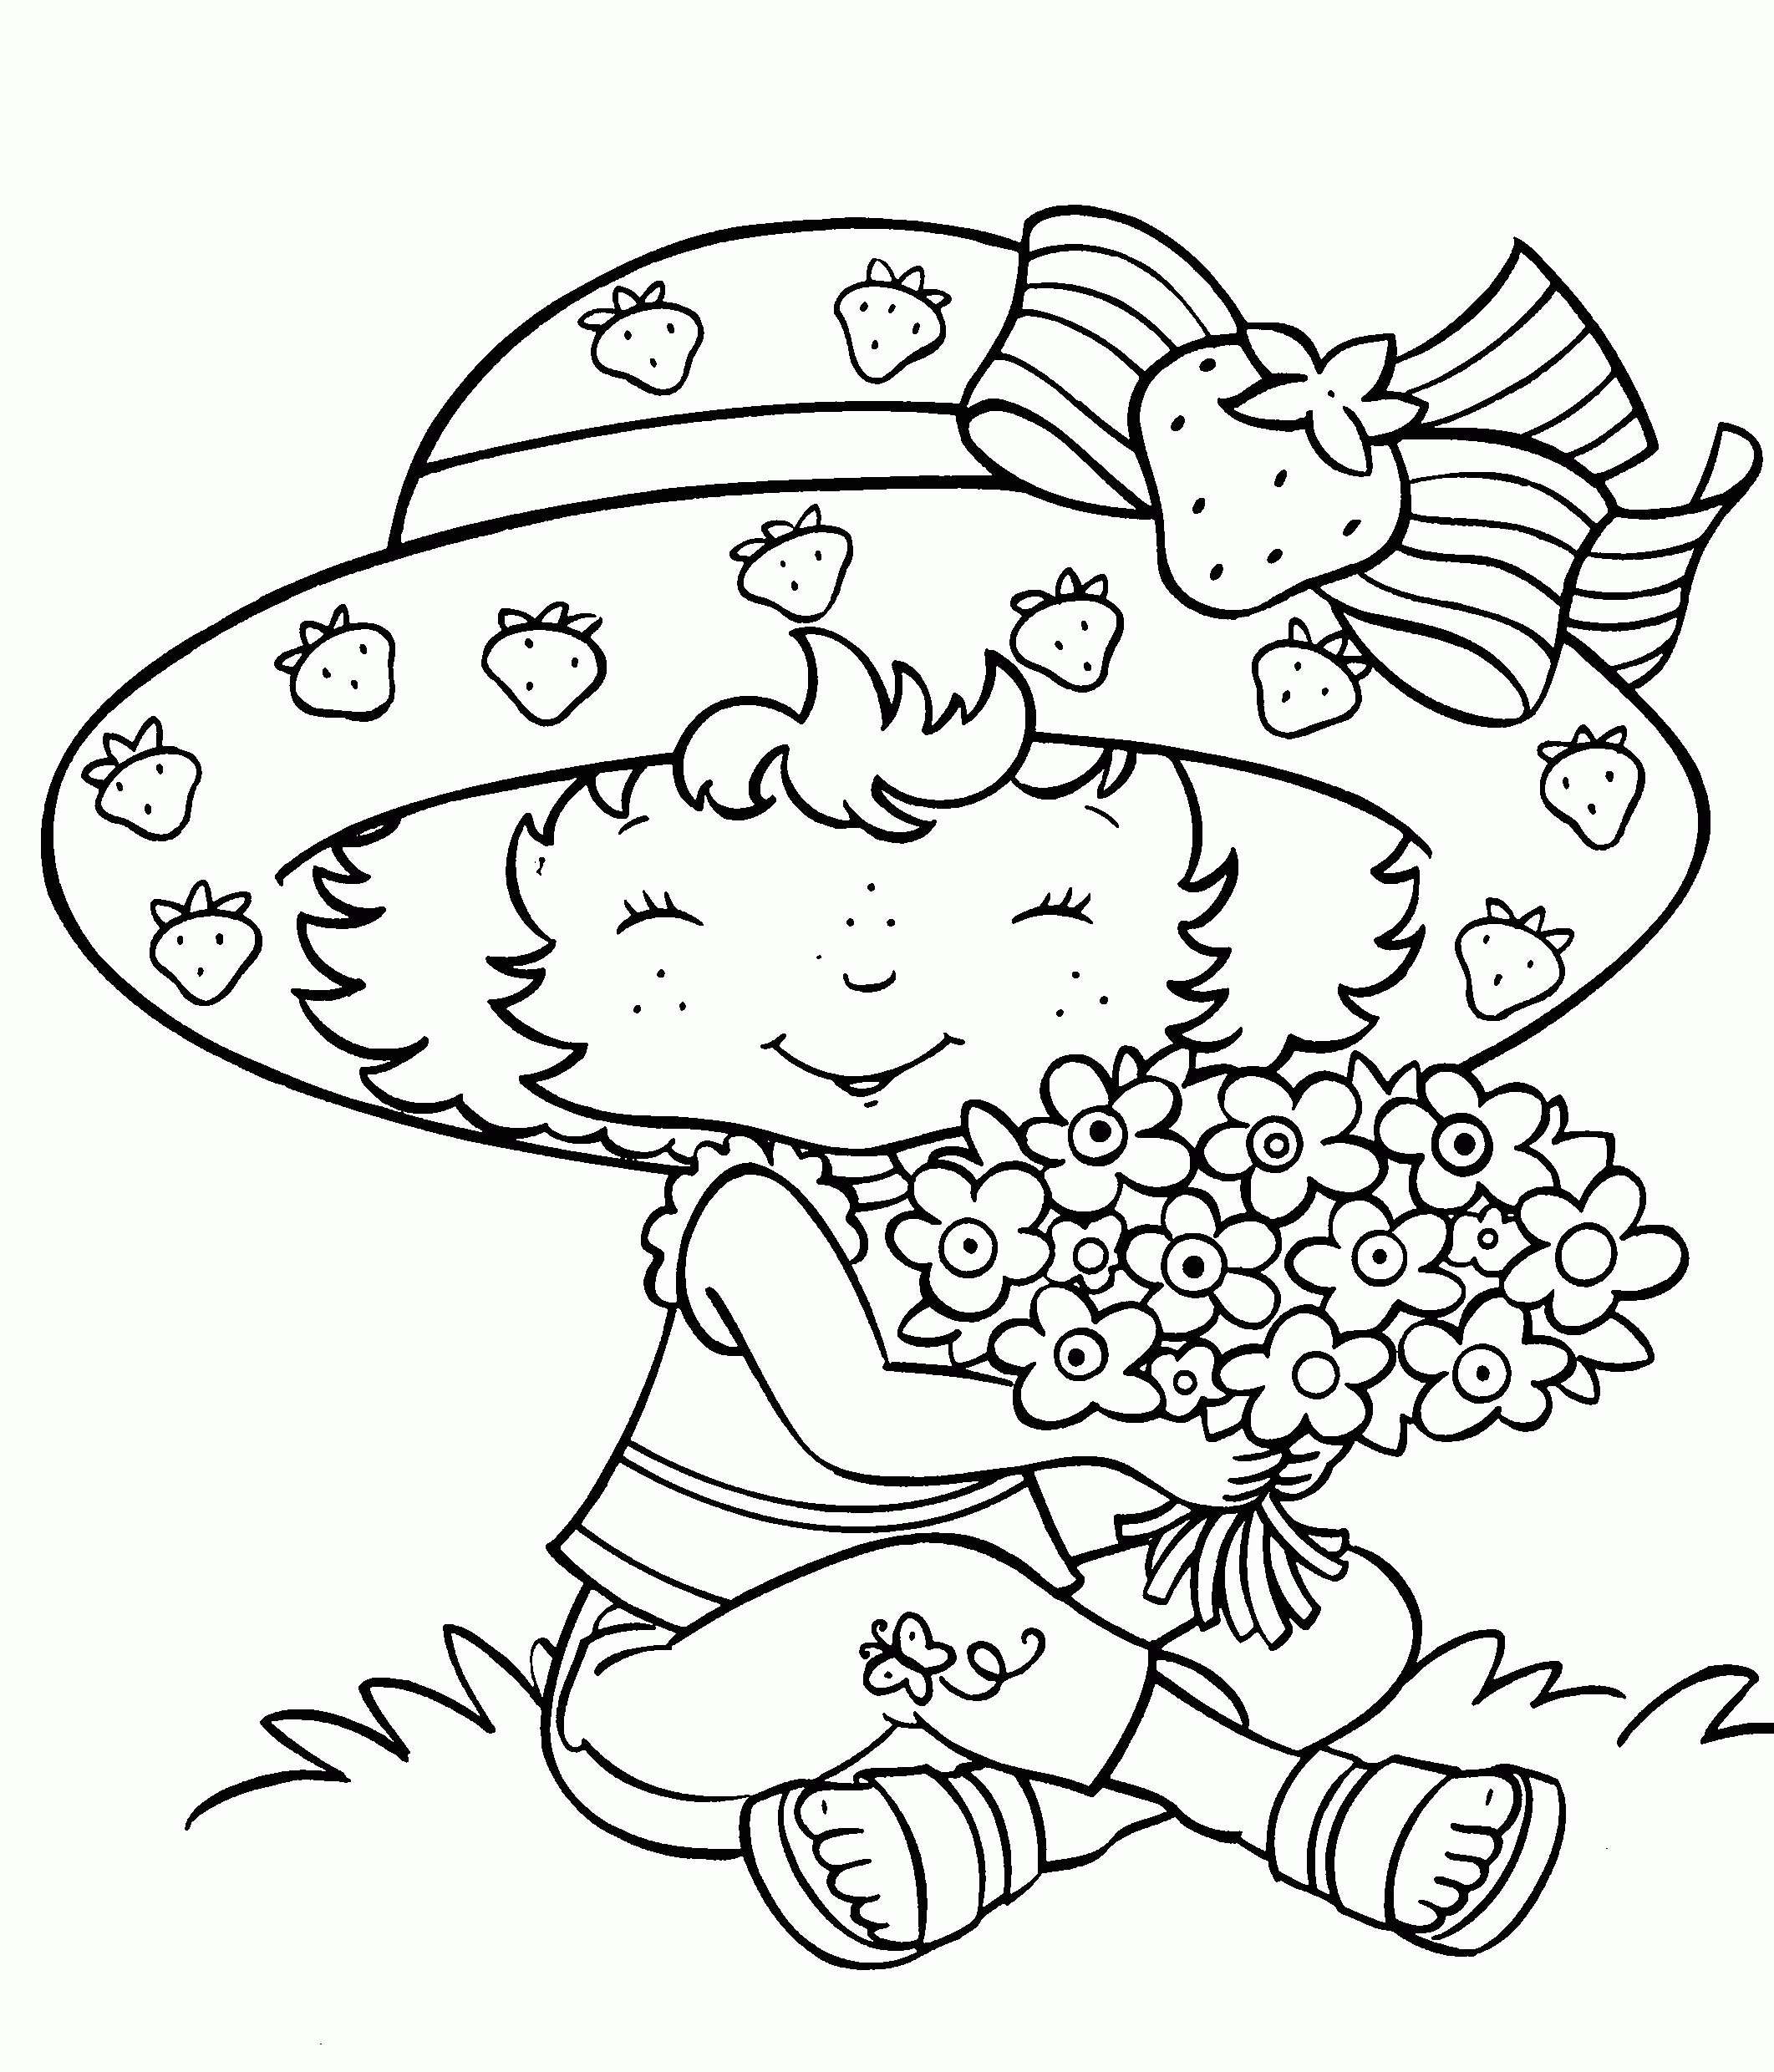 Printable Strawberry Shortcake Coloring Pages | Coloring Me